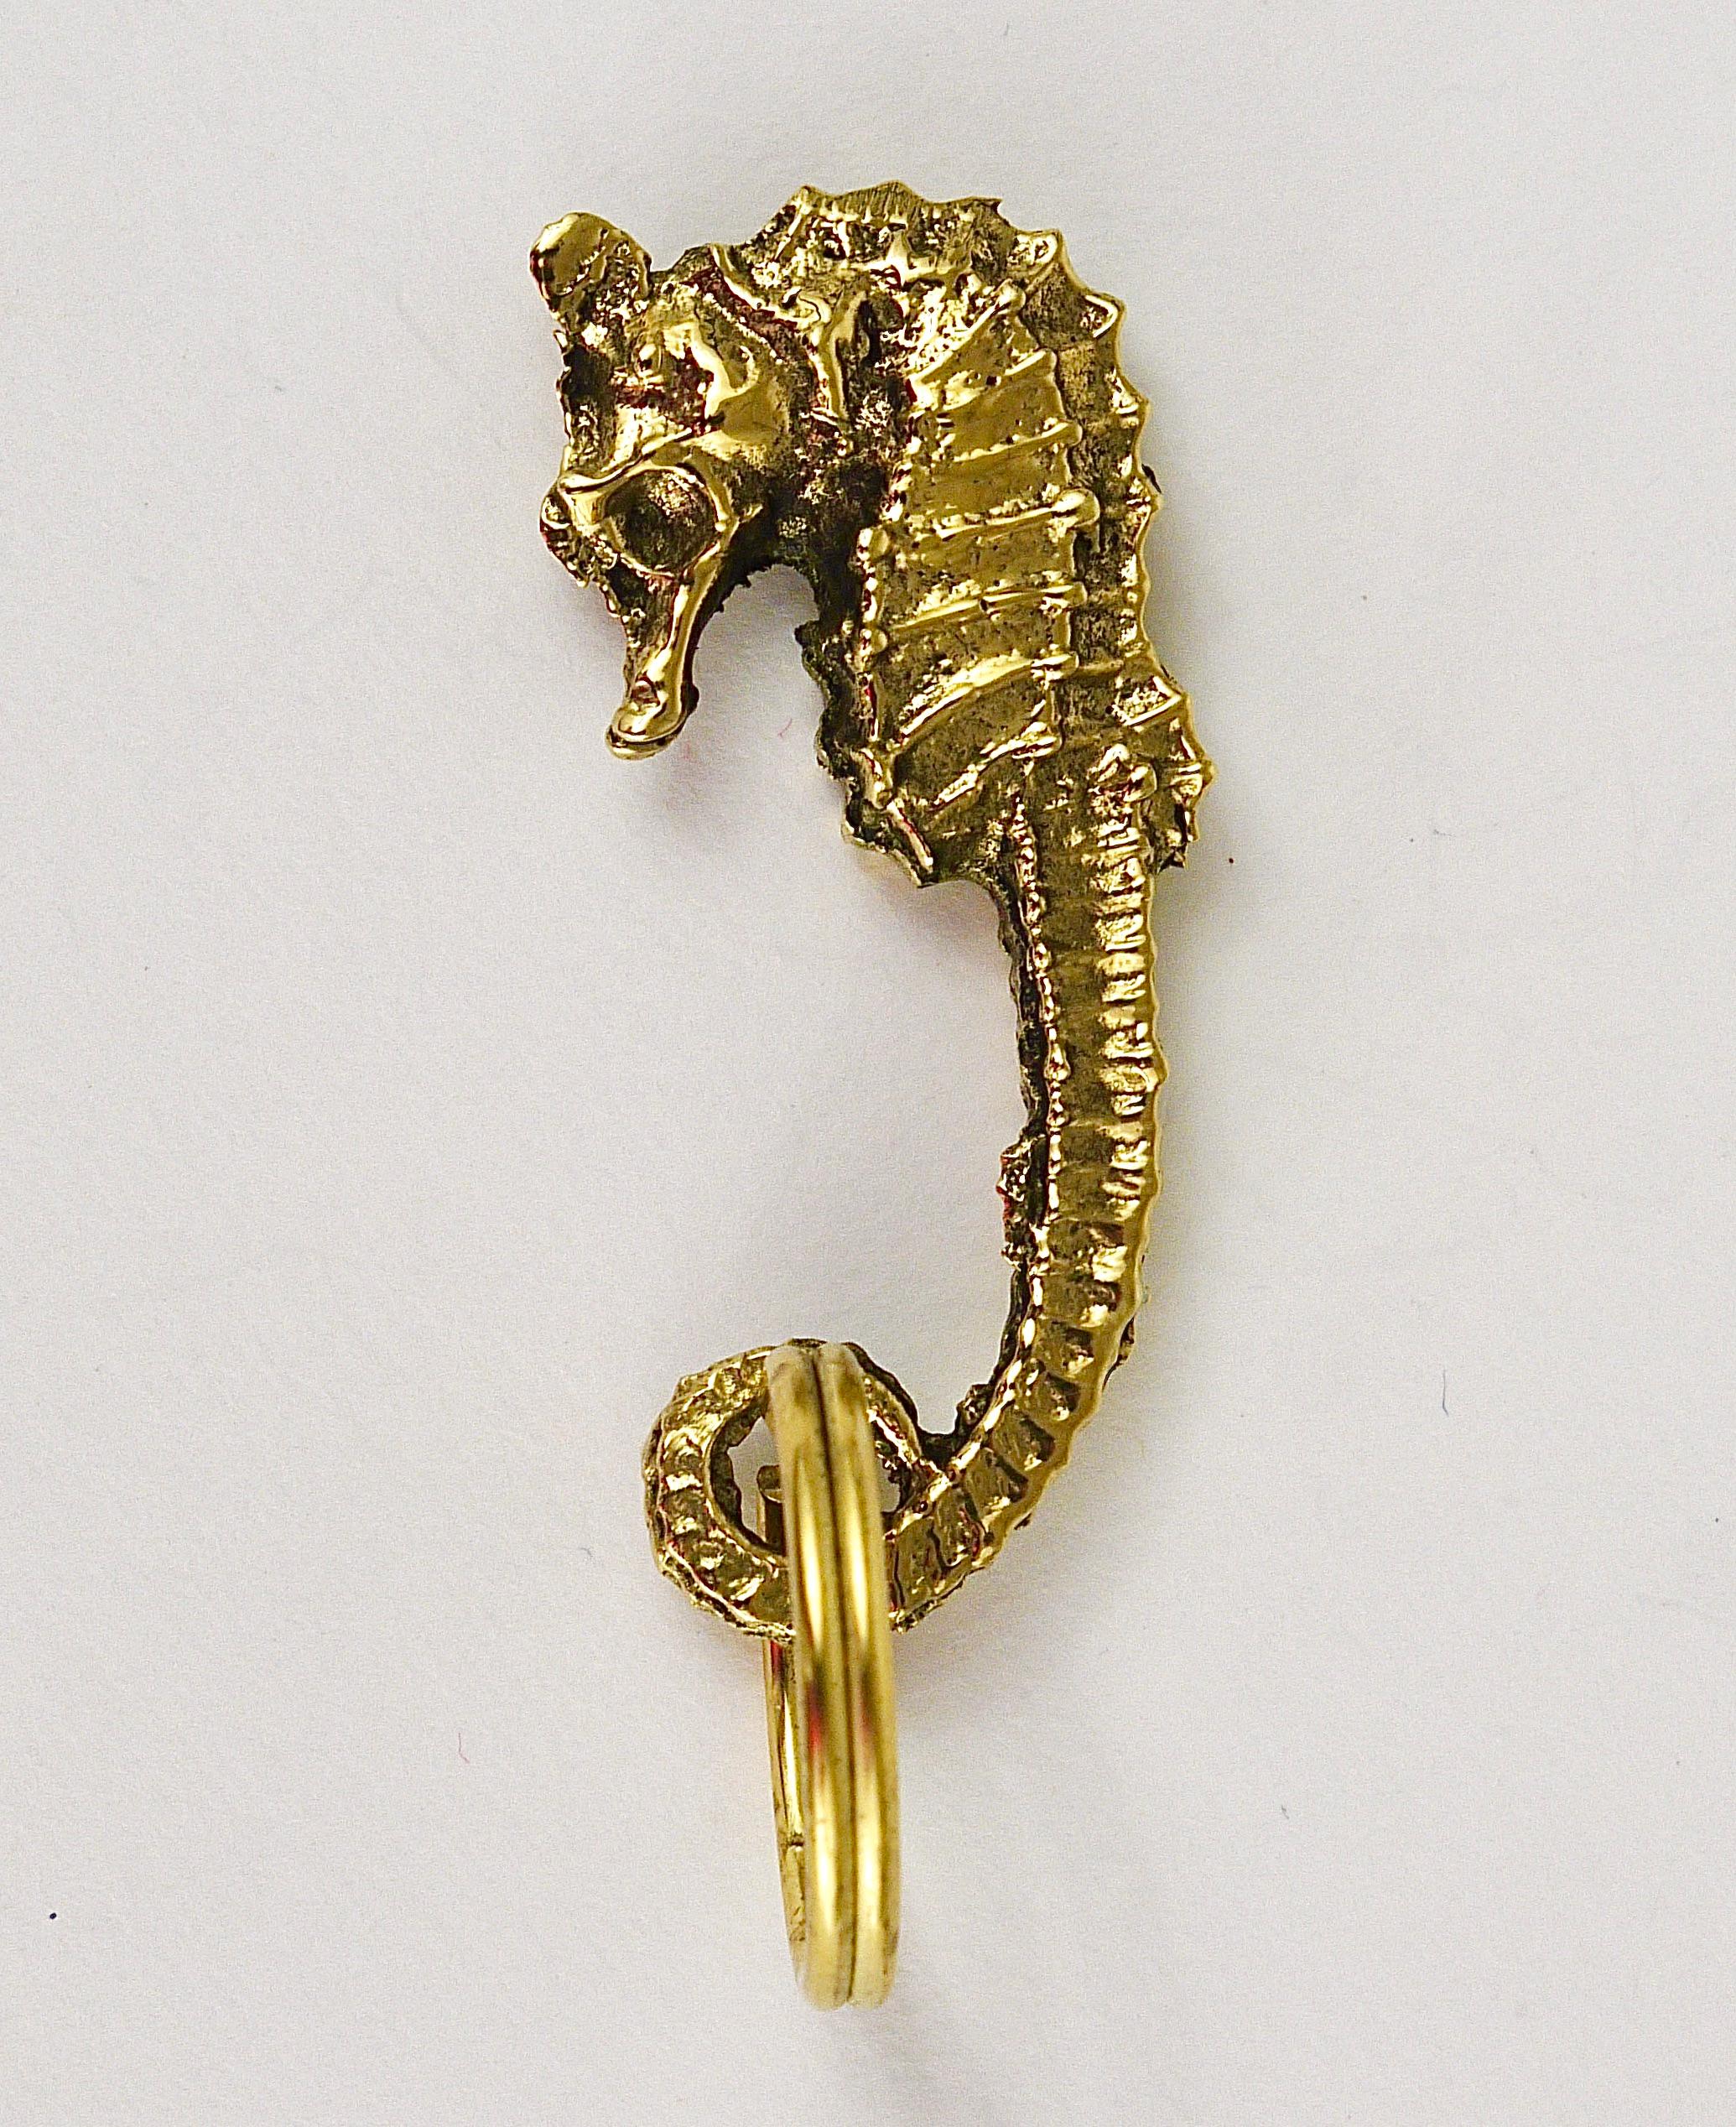 Carl Auböck Midcentury Brass Seahorse Handmade Key Ring Chain Holder In Excellent Condition For Sale In Vienna, AT